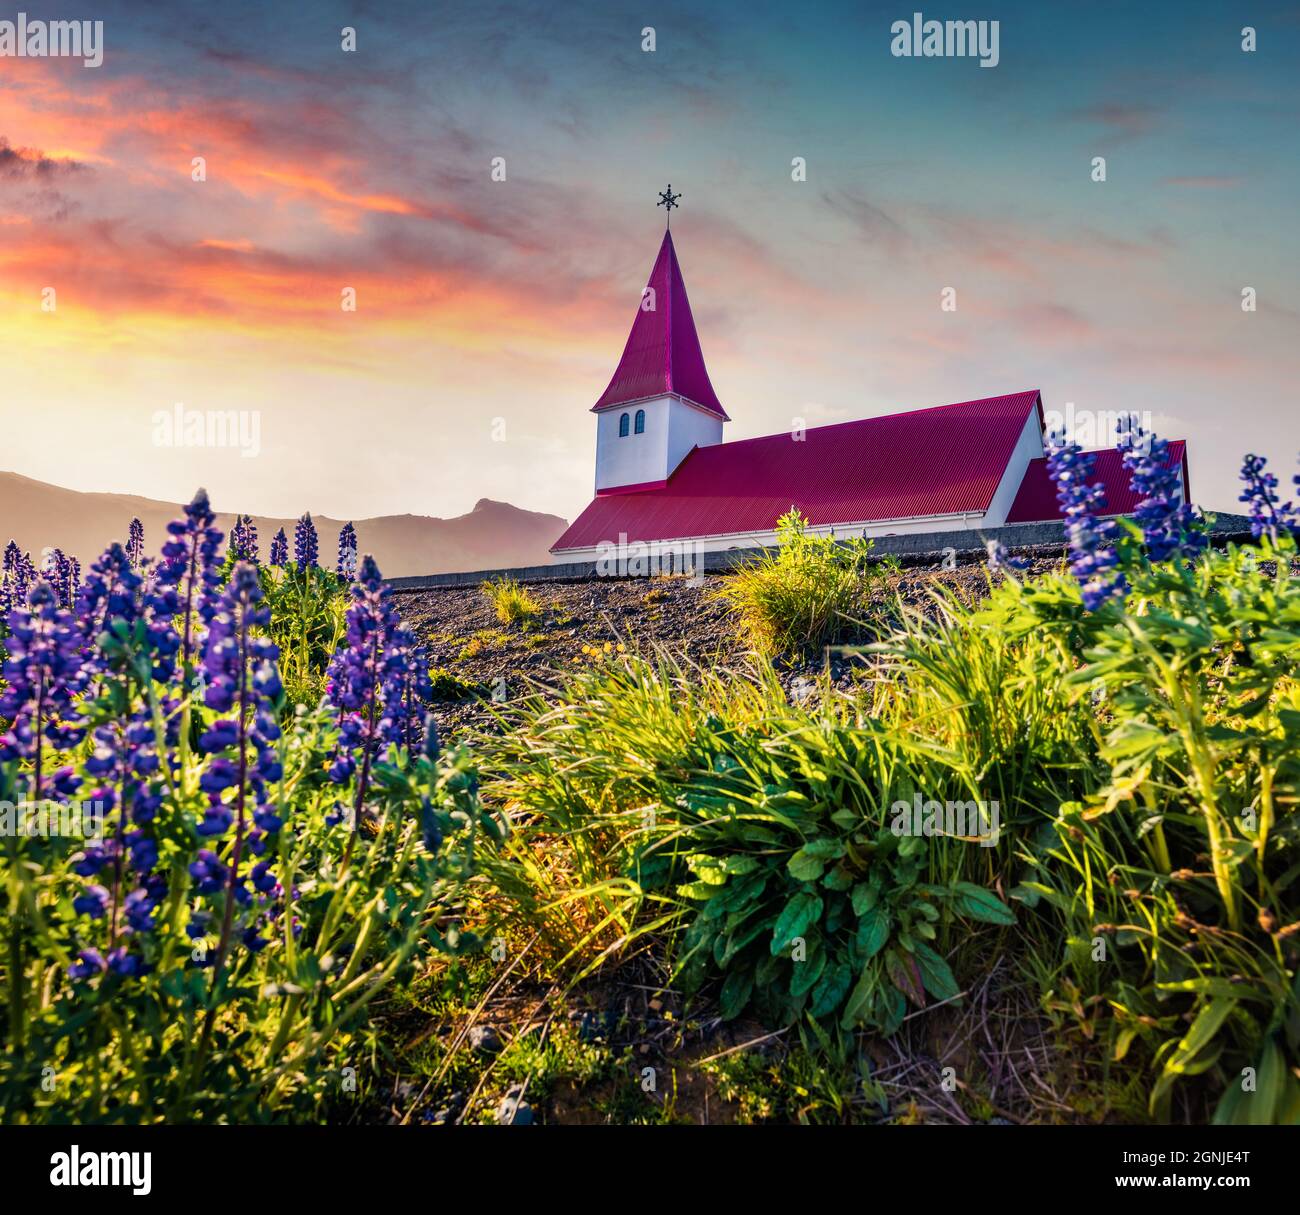 Attractive morning view of Vikurkirkja (Vik i Myrdal Church), Vik location. Stunning summer scene of Iceland with field of blooming lupine flowers. Tr Stock Photo